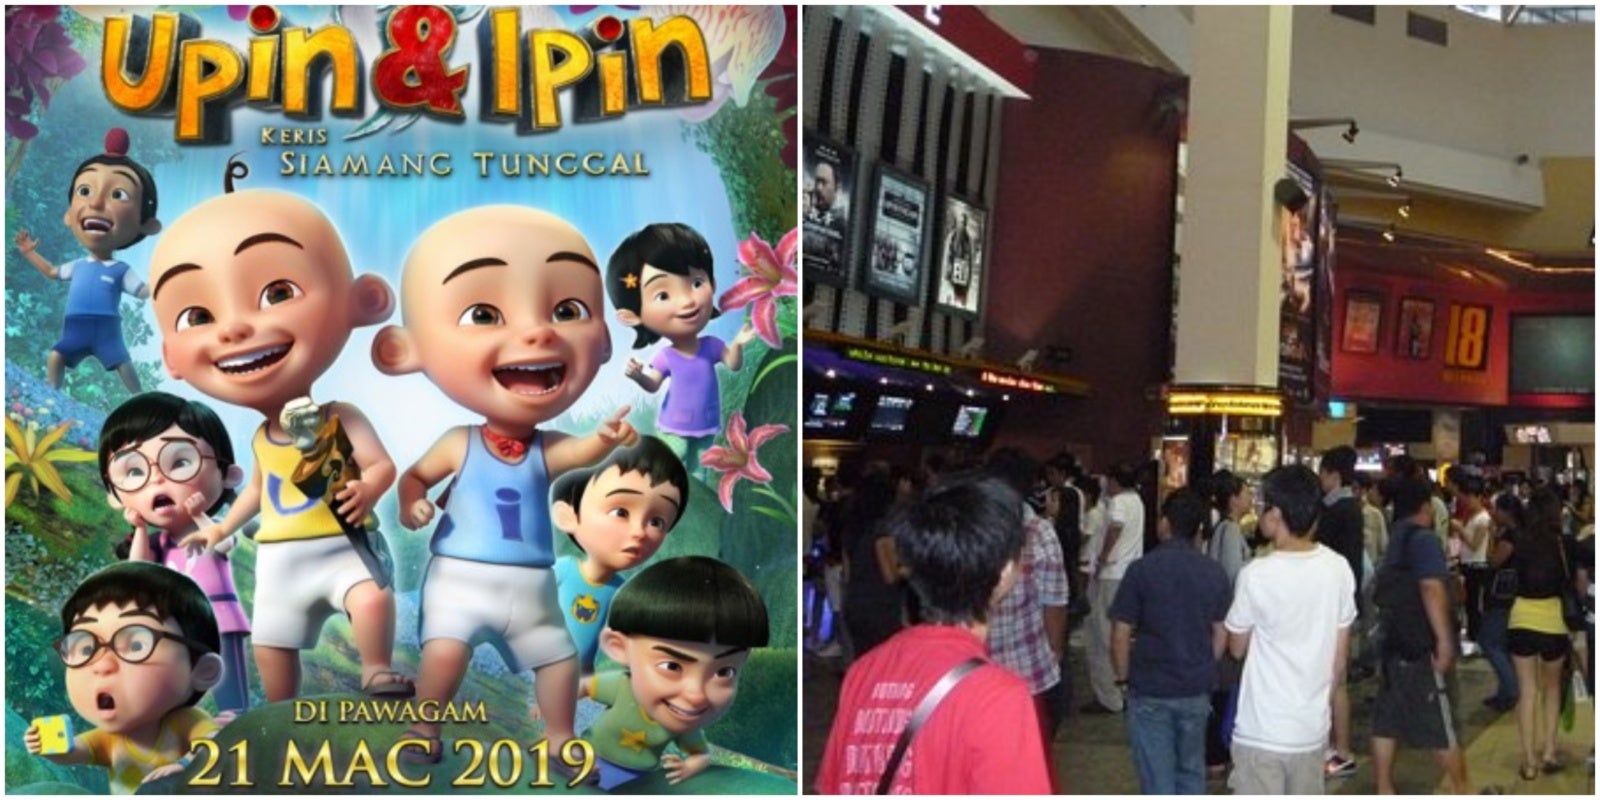 Upin & Ipin Have Just Become Malaysia's Highest Earning Animated Film with RM25 Million - WORLD OF BUZZ